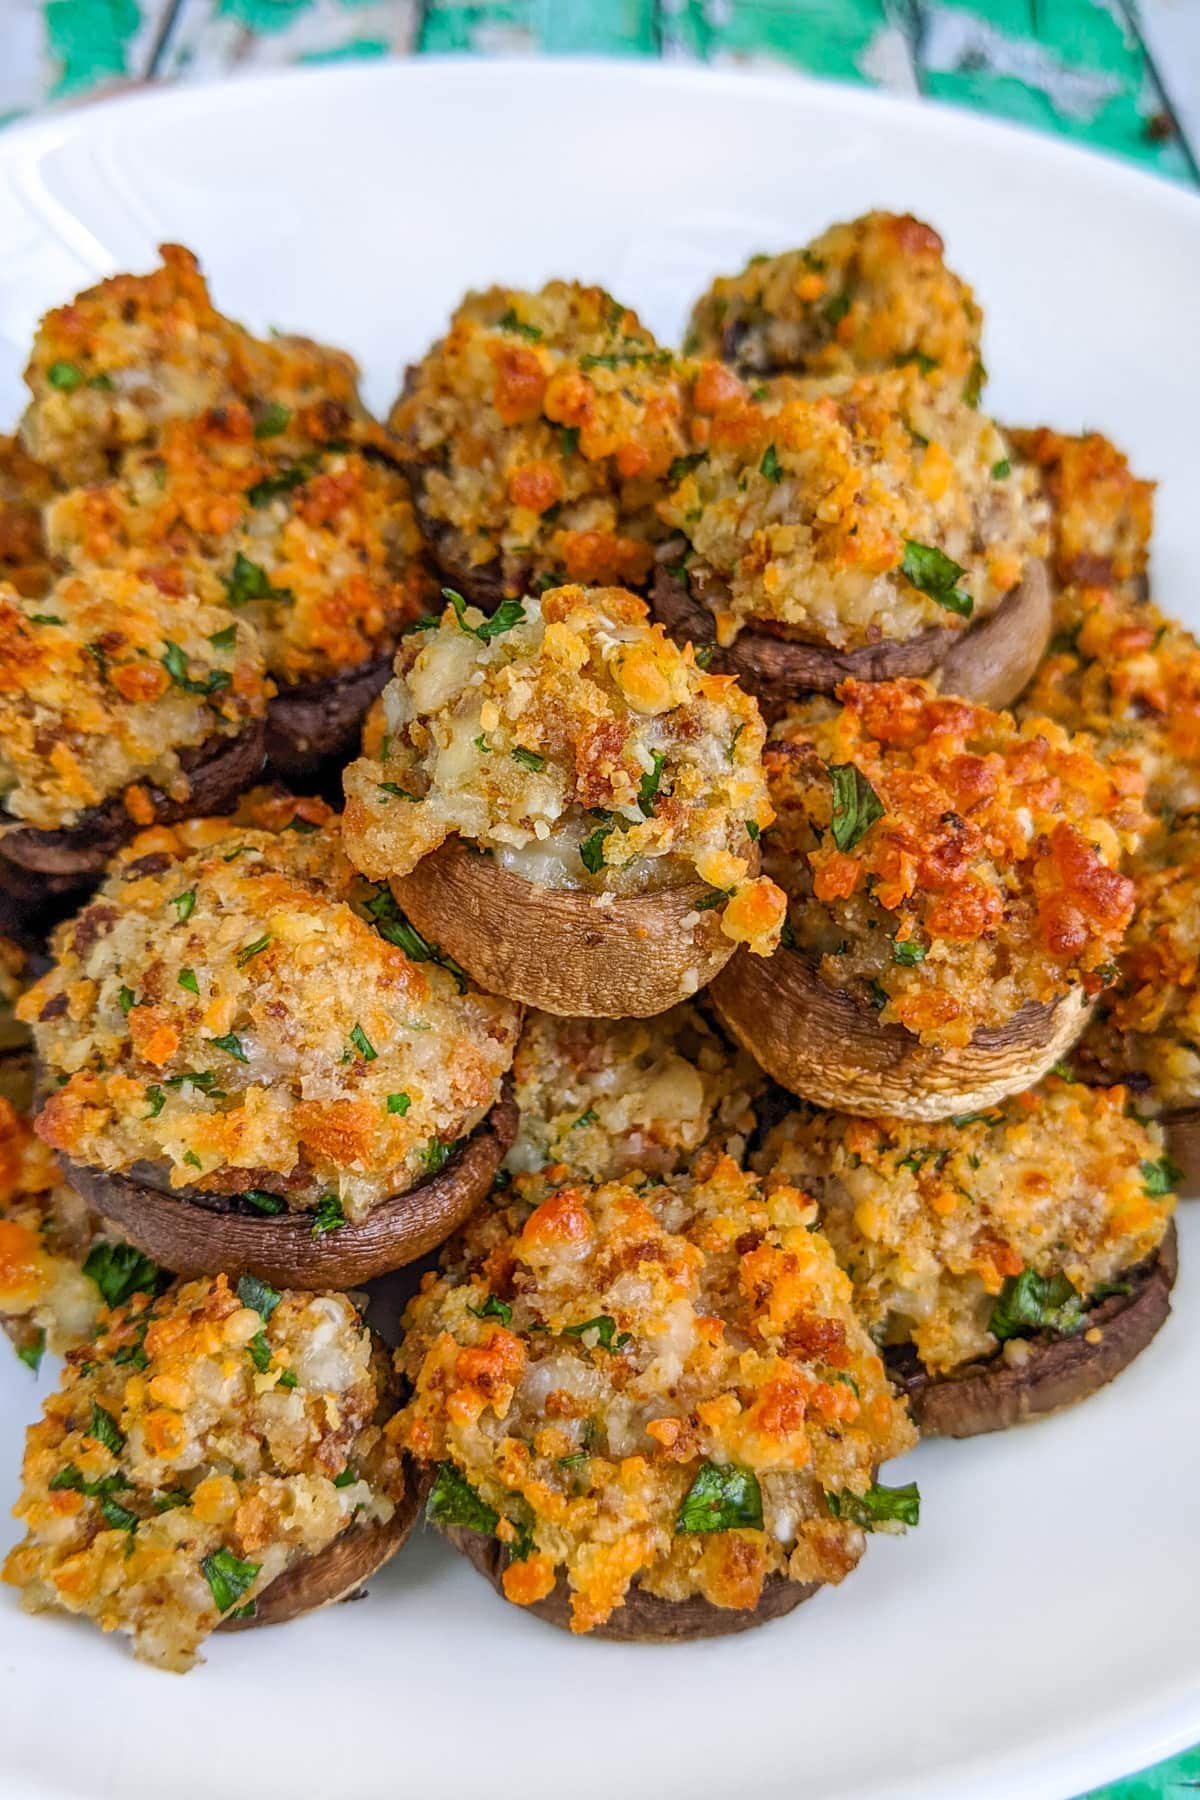 Stuffed mushrooms without cream cheese